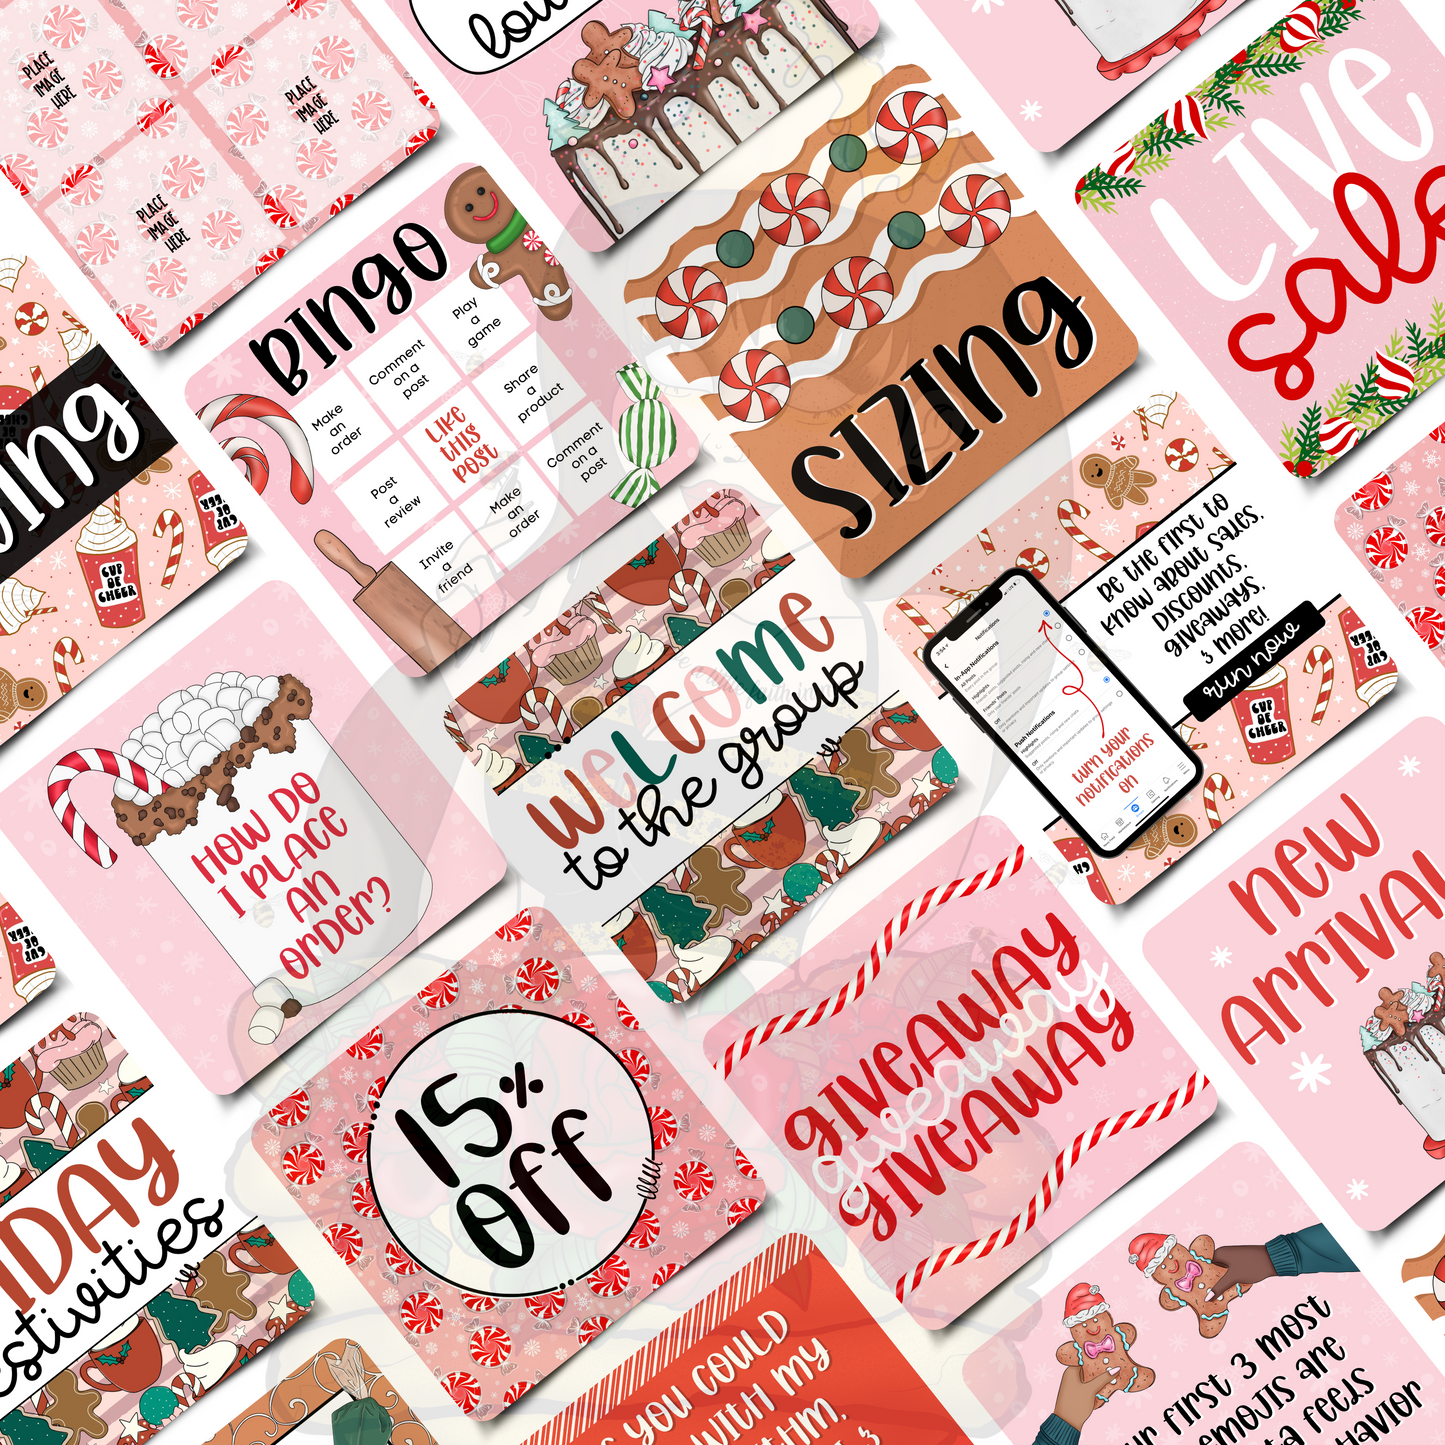 Oh snap, it’s Christmas Business Engagement & Social Media Content Graphics Collection